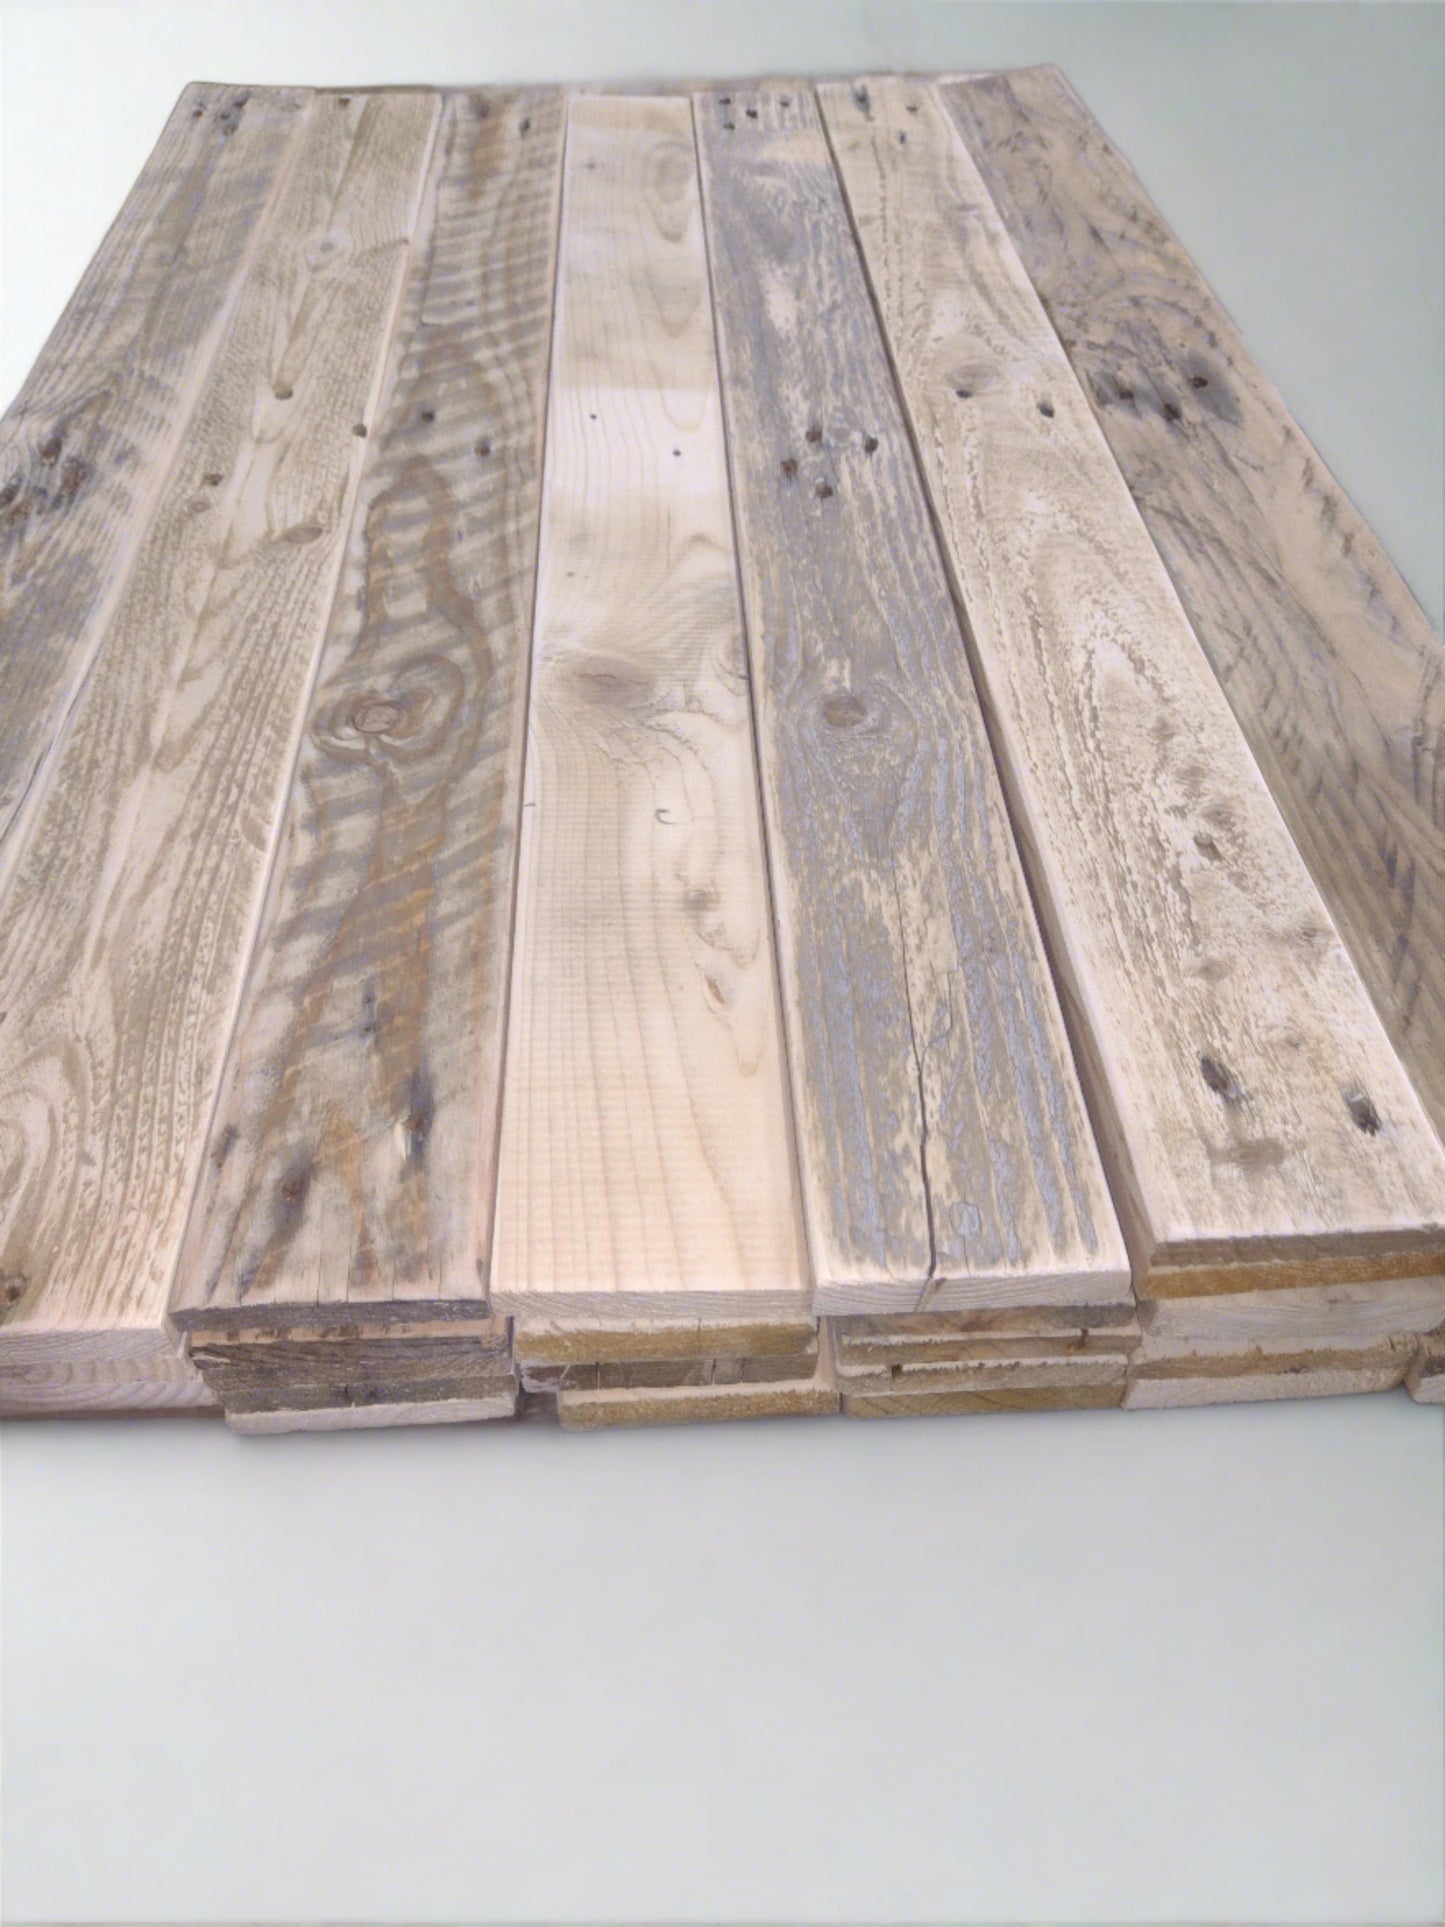 10 SQM Wooden Planks Rustic Sanded Decorative For Cladding